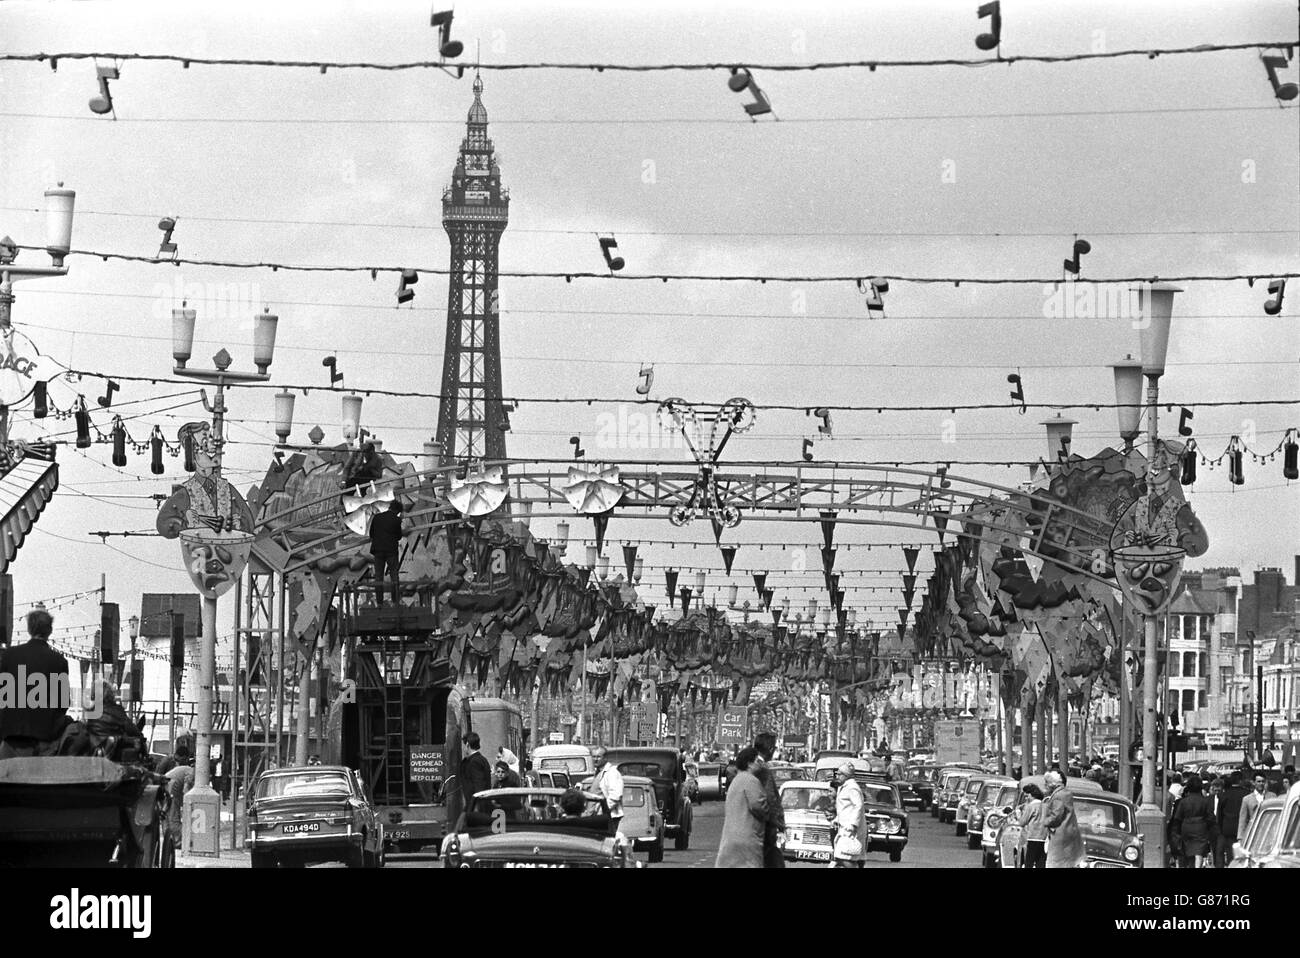 The Blackpool Illuminations are constructed along seven miles of the town's promenade. They are due to be turned on by Dr Horace King, Speaker of the House of Commons. Stock Photo